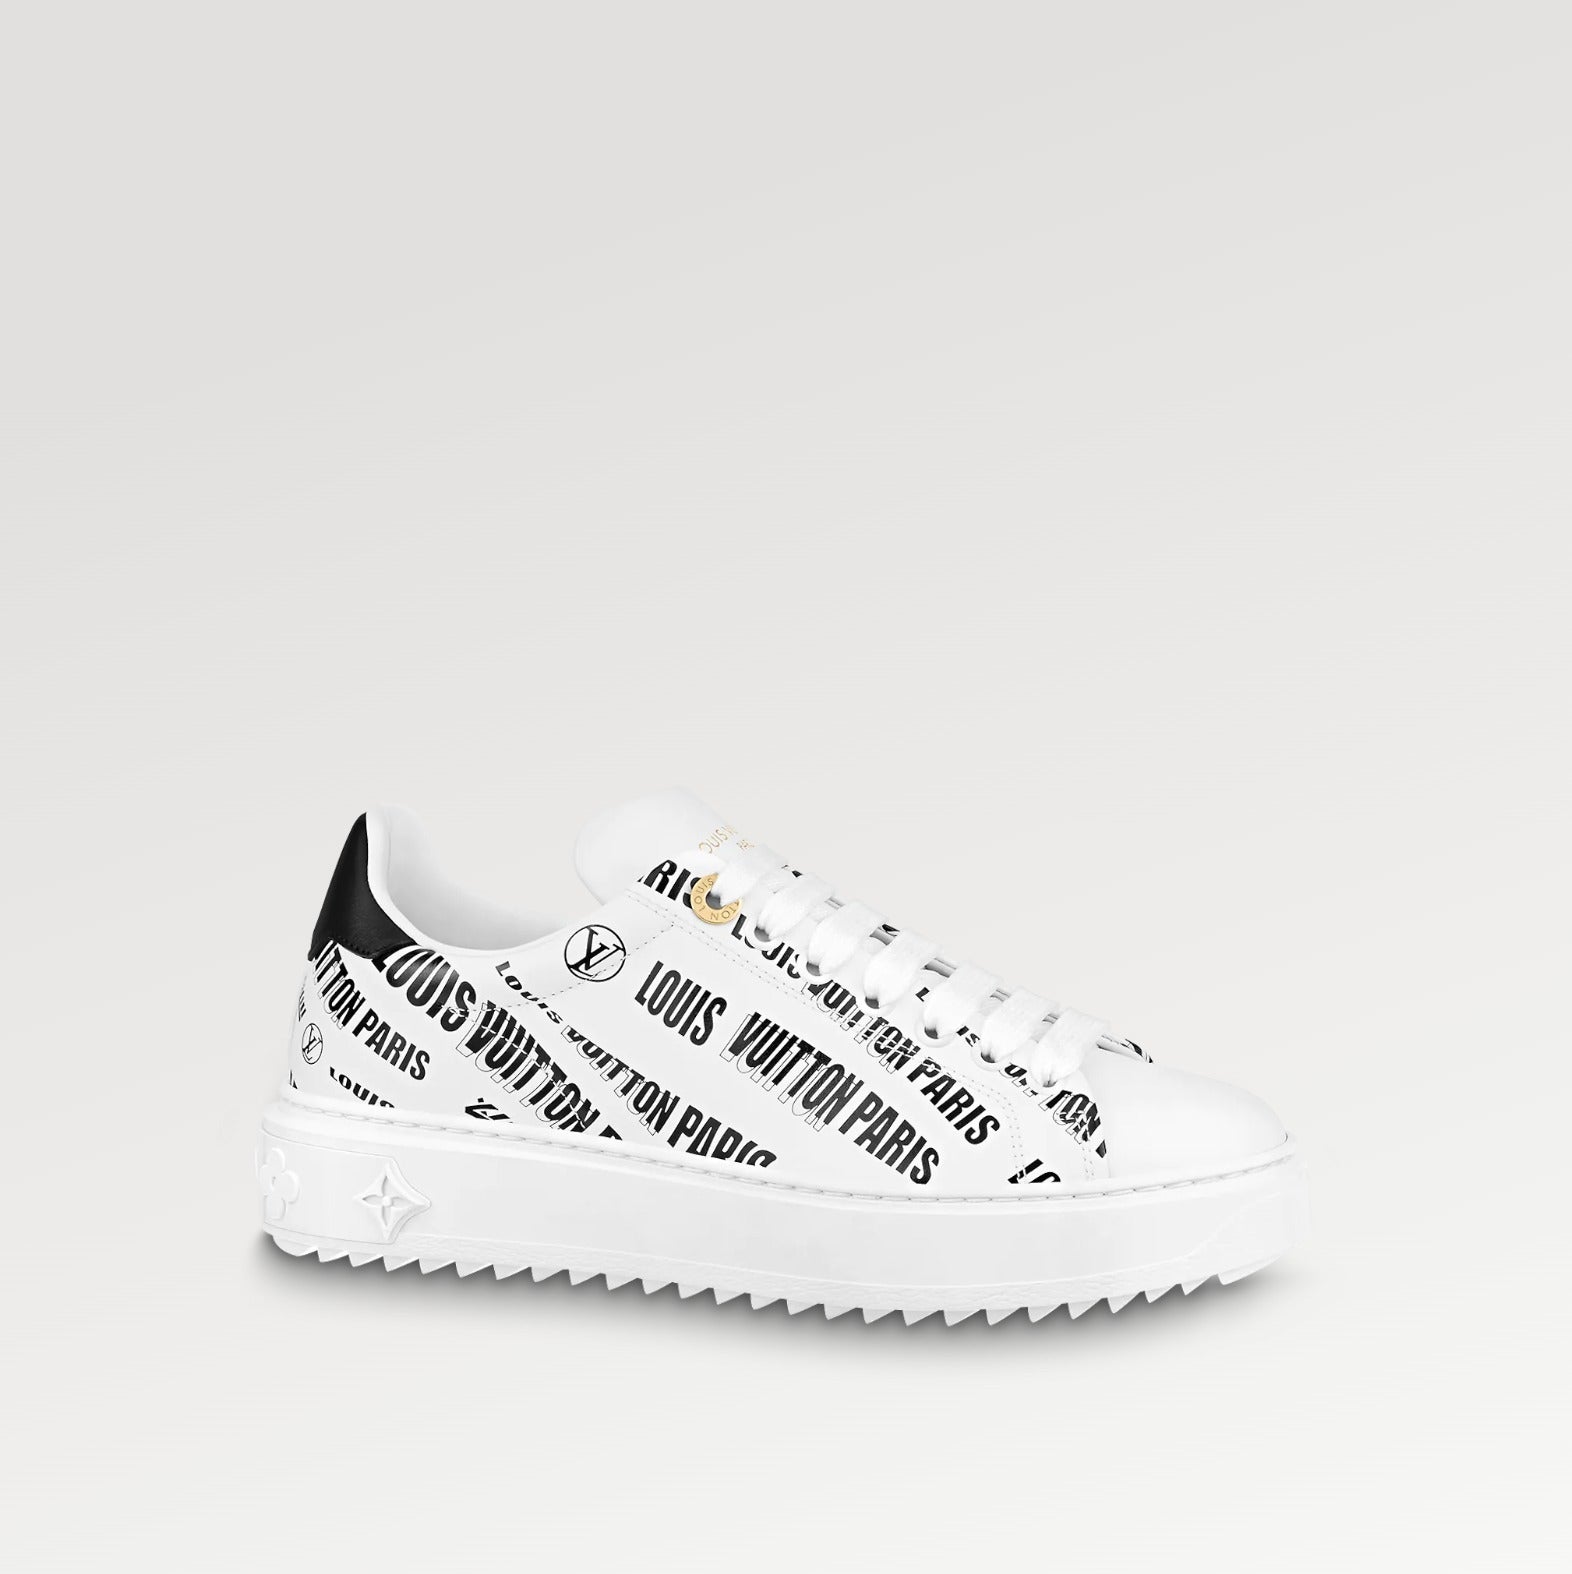 LOUIS VUITTON TIME OUT SNEAKERS – Caroline's Fashion Luxuries